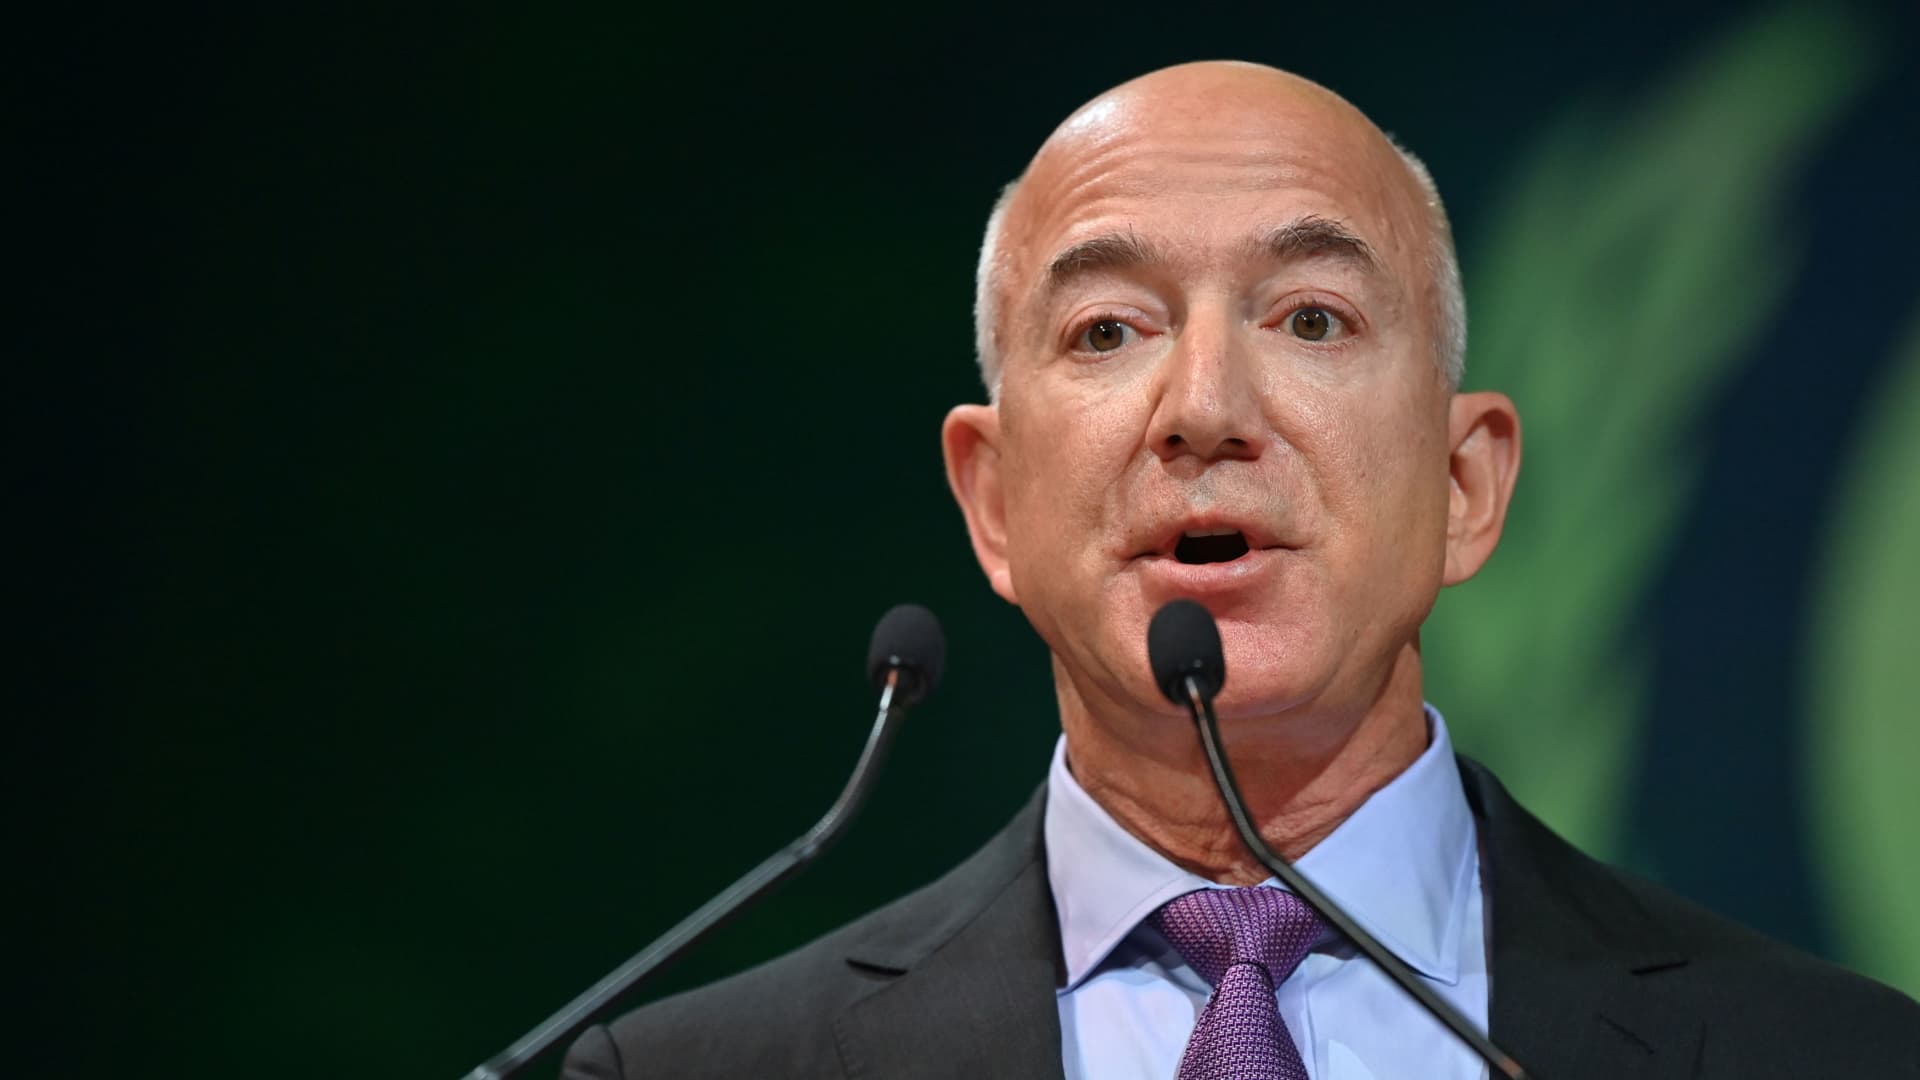 White House hits back at Amazon’s Bezos after Biden inflation spat